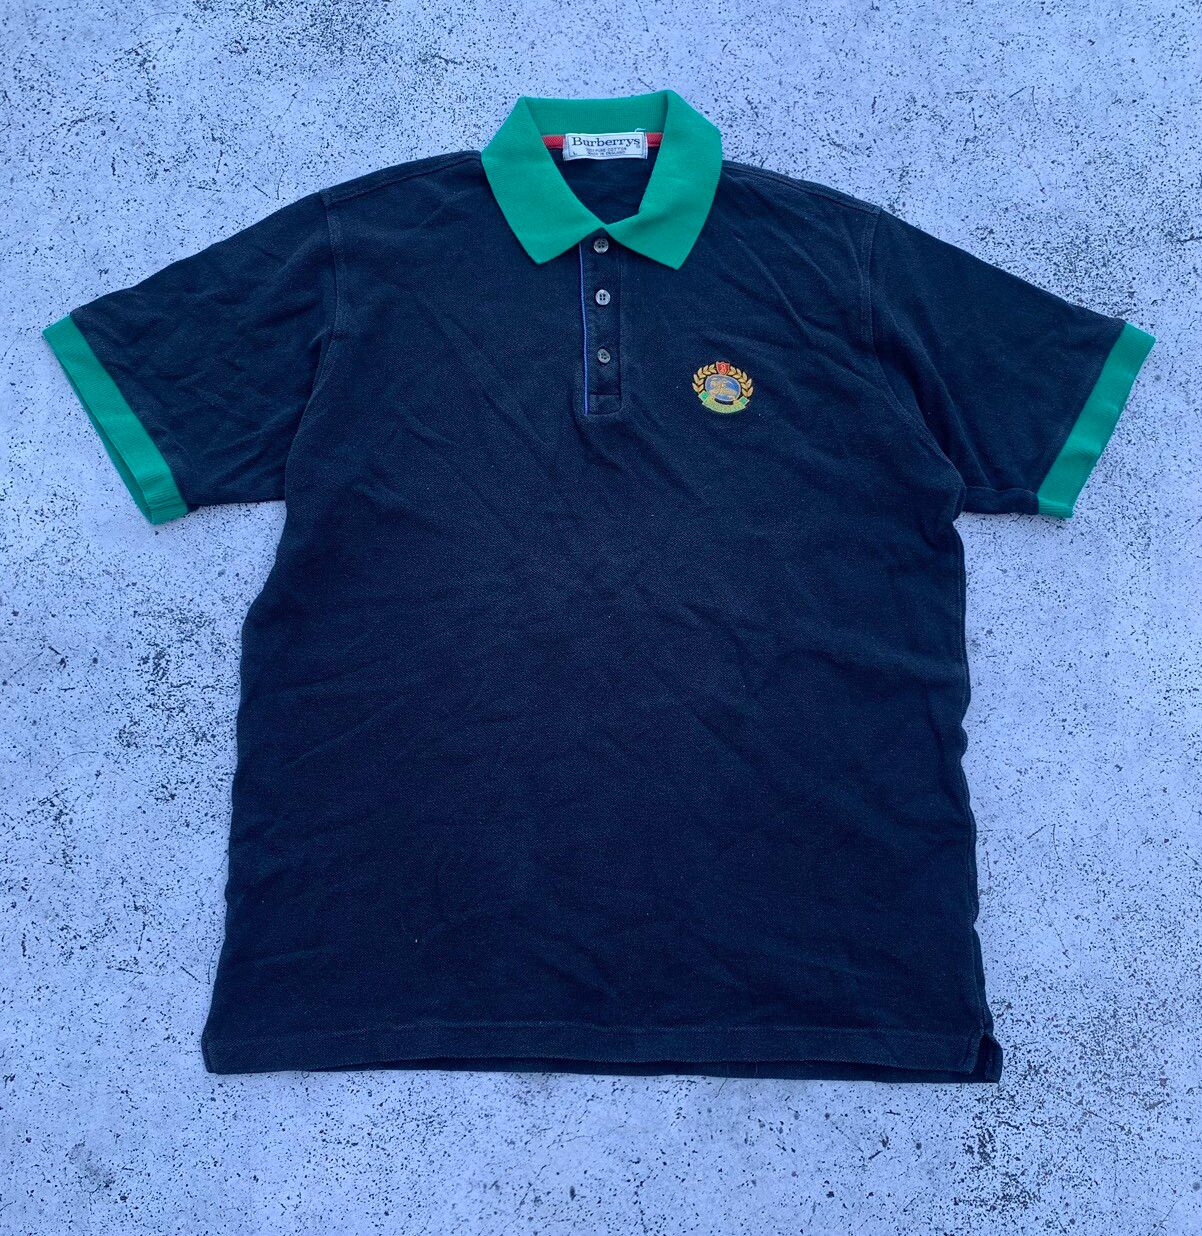 Vintage Very Vintage Burberry T-shirt Polo Burberry’s | Grailed